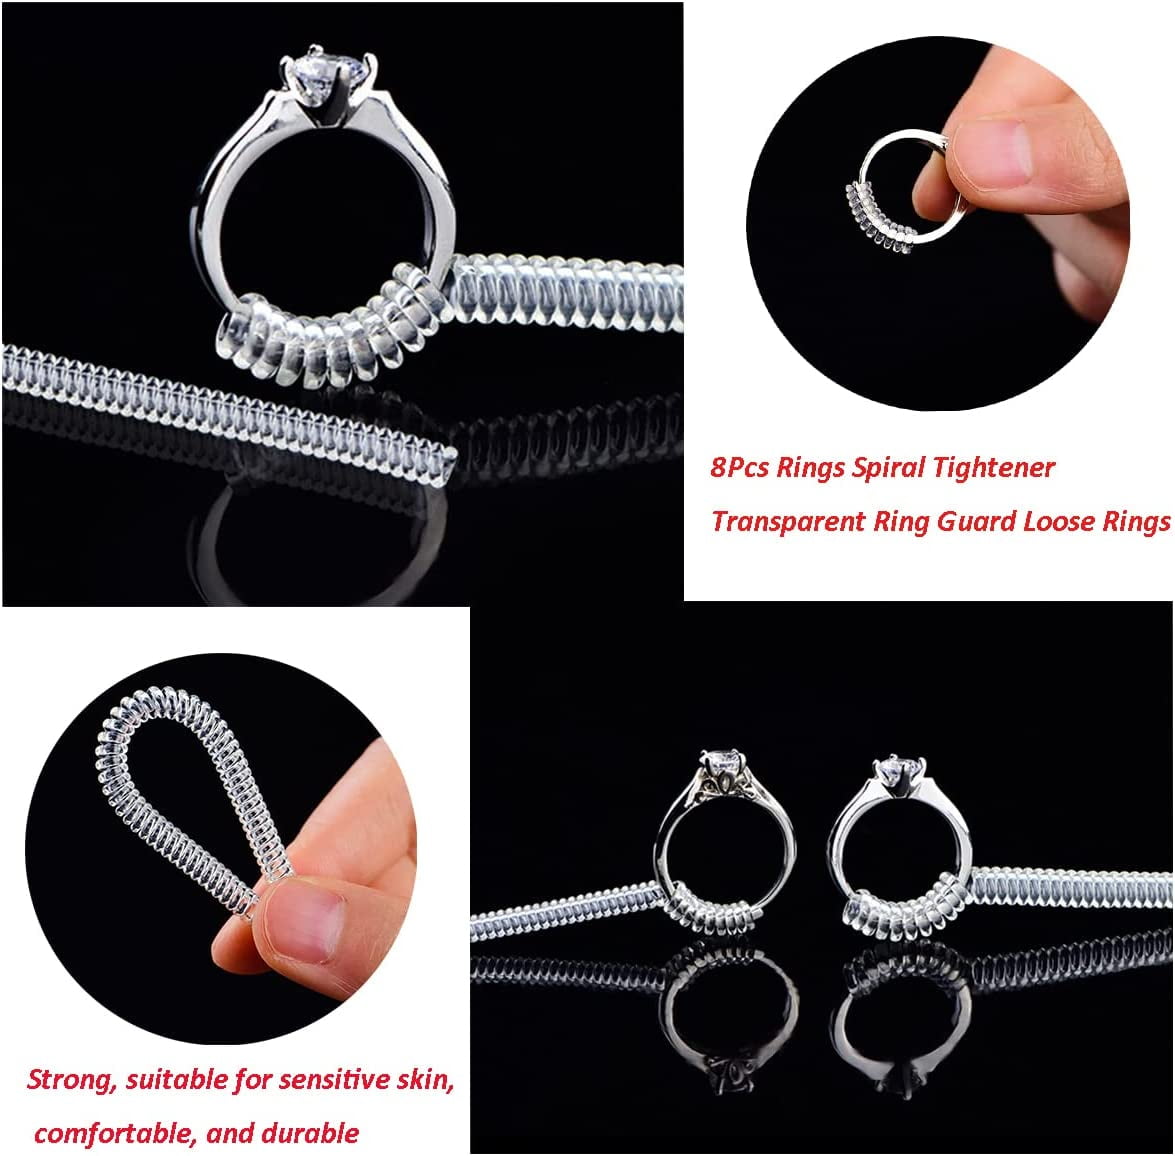 8pcs Silicone Invisible Clear Ring Size Adjuster Resizer For Loose Rings  Guard Tightener Resizing Jewelry Tools Fit Any Rings